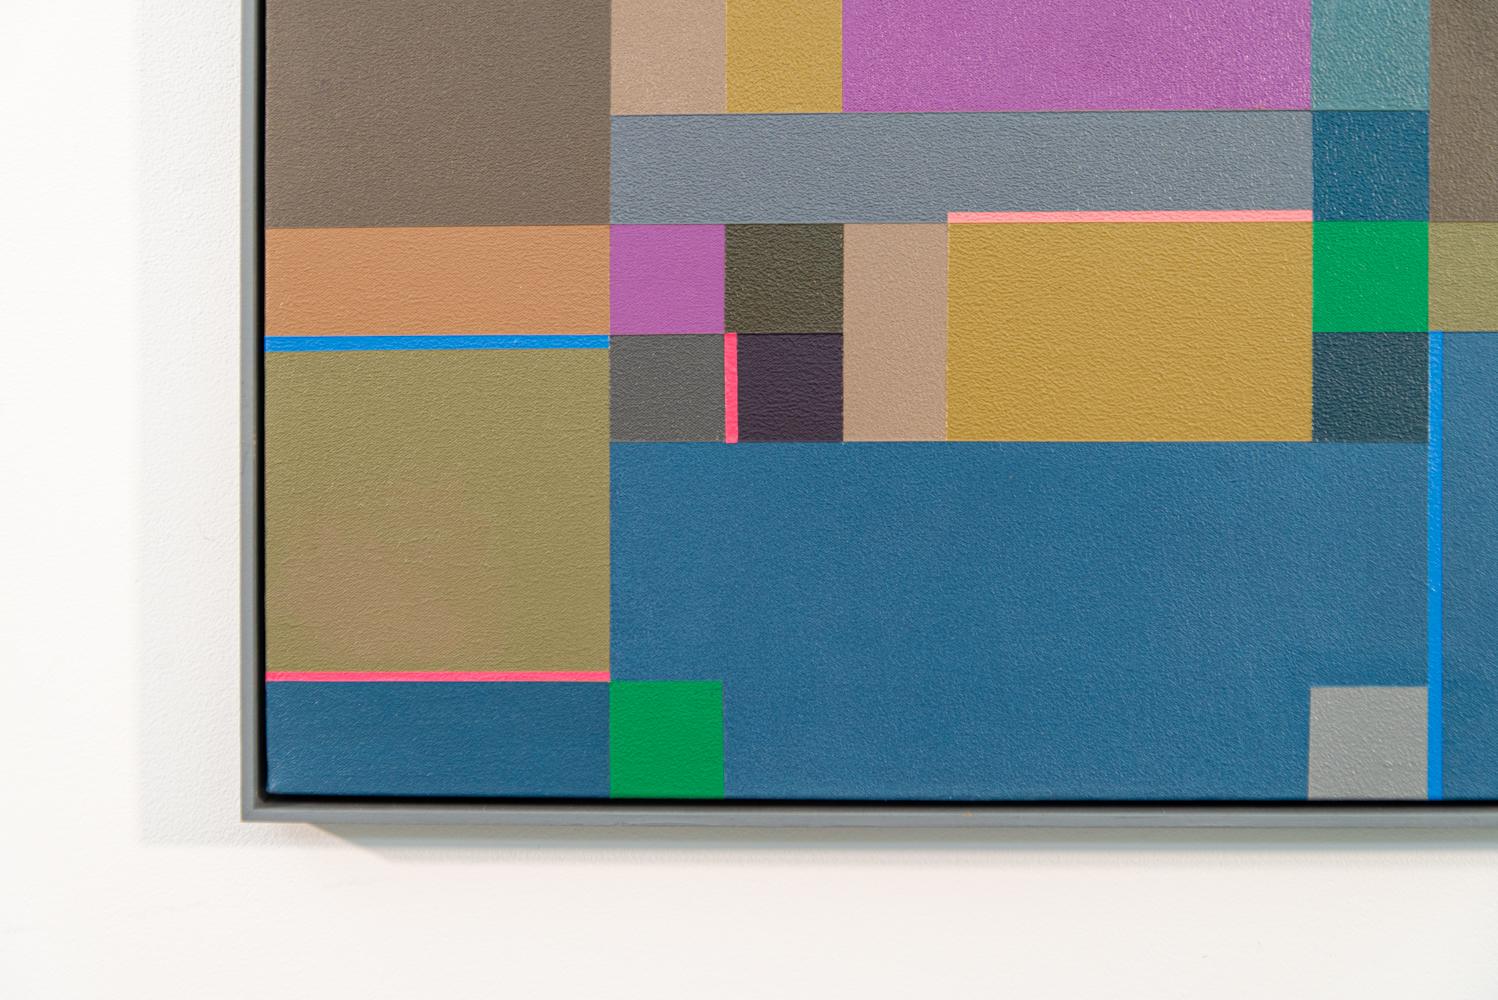 In this lively painting by modernist Burton Kramer a mirrored geometric pattern is enhanced by a complimentary soft colour palette of blues, pinks, yellows, and taupe. The title ‘Fugue’ refers to a musical composition in which themes are repeated